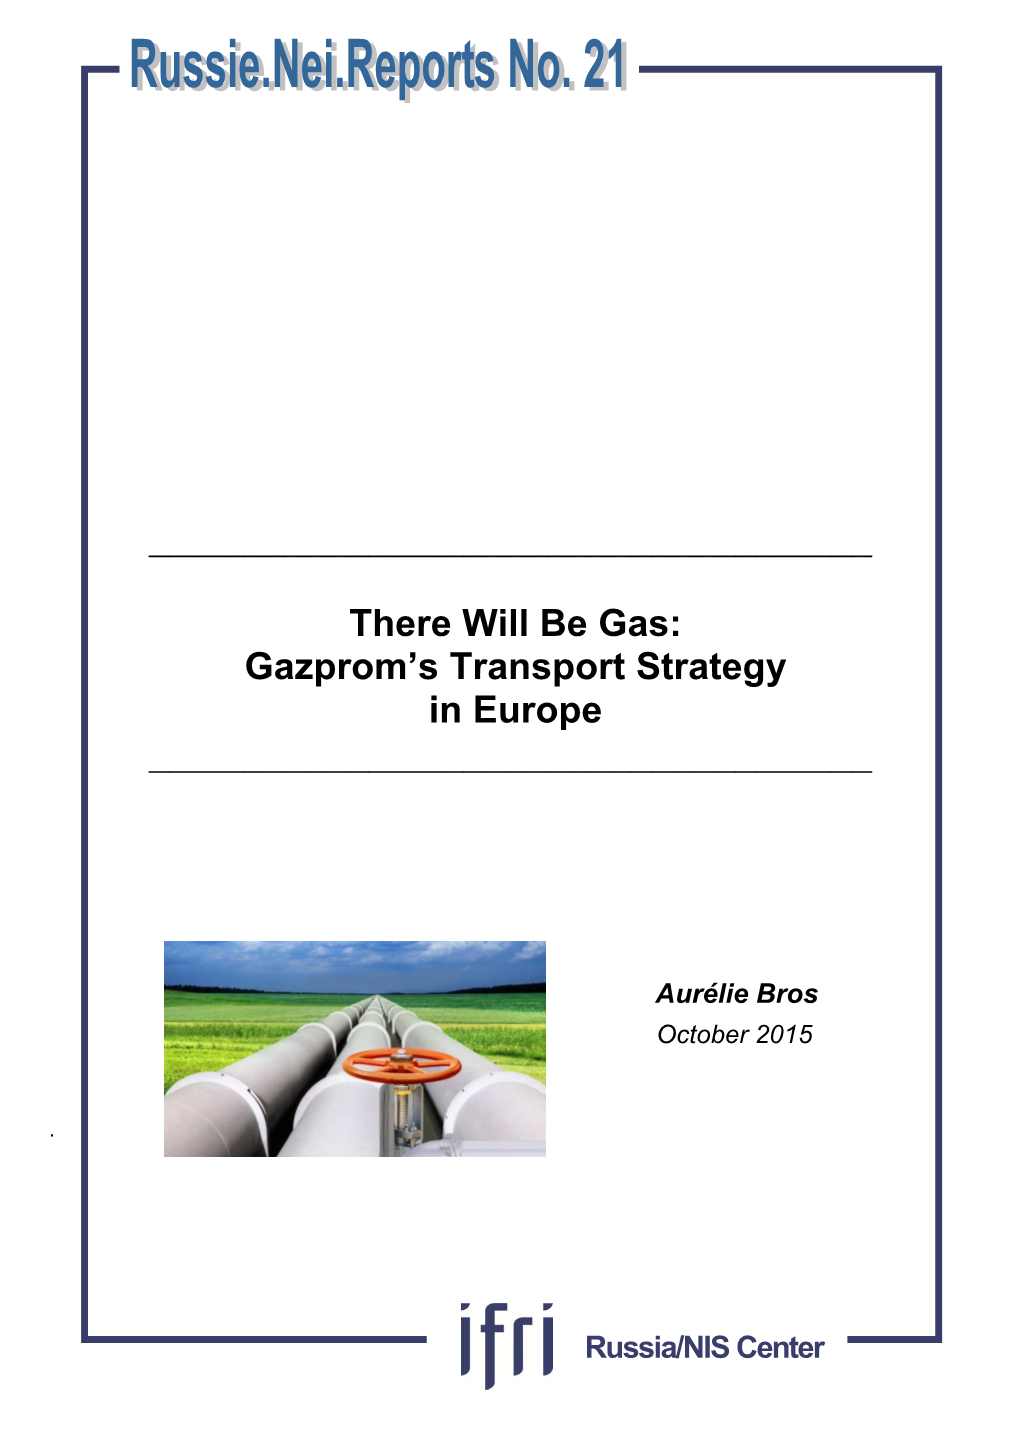 There Will Be Gas: Gazprom's Transport Strategy in Europe